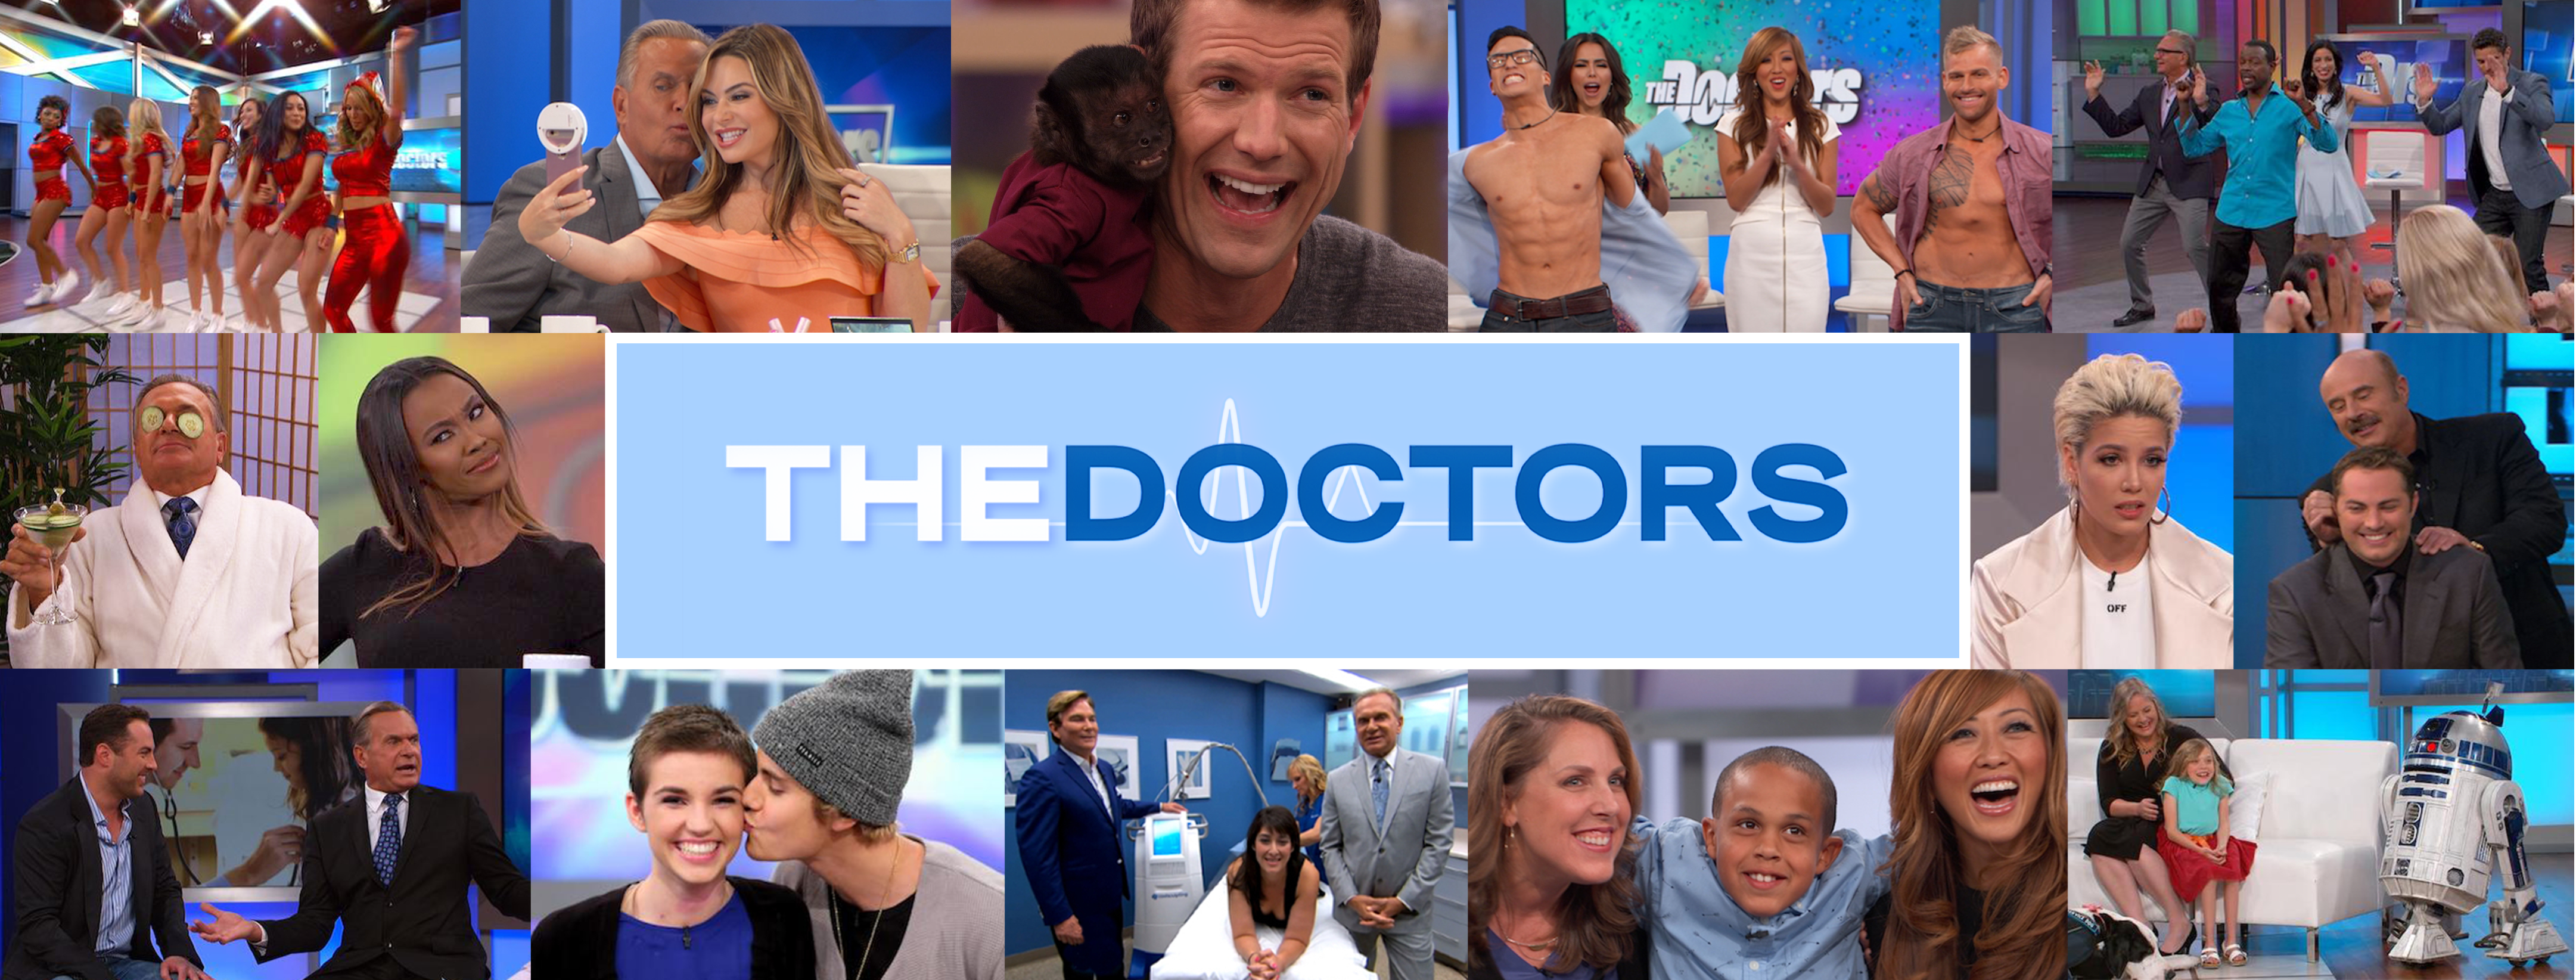 The Condom Challenge New Viral Trend The Doctors Tv Show